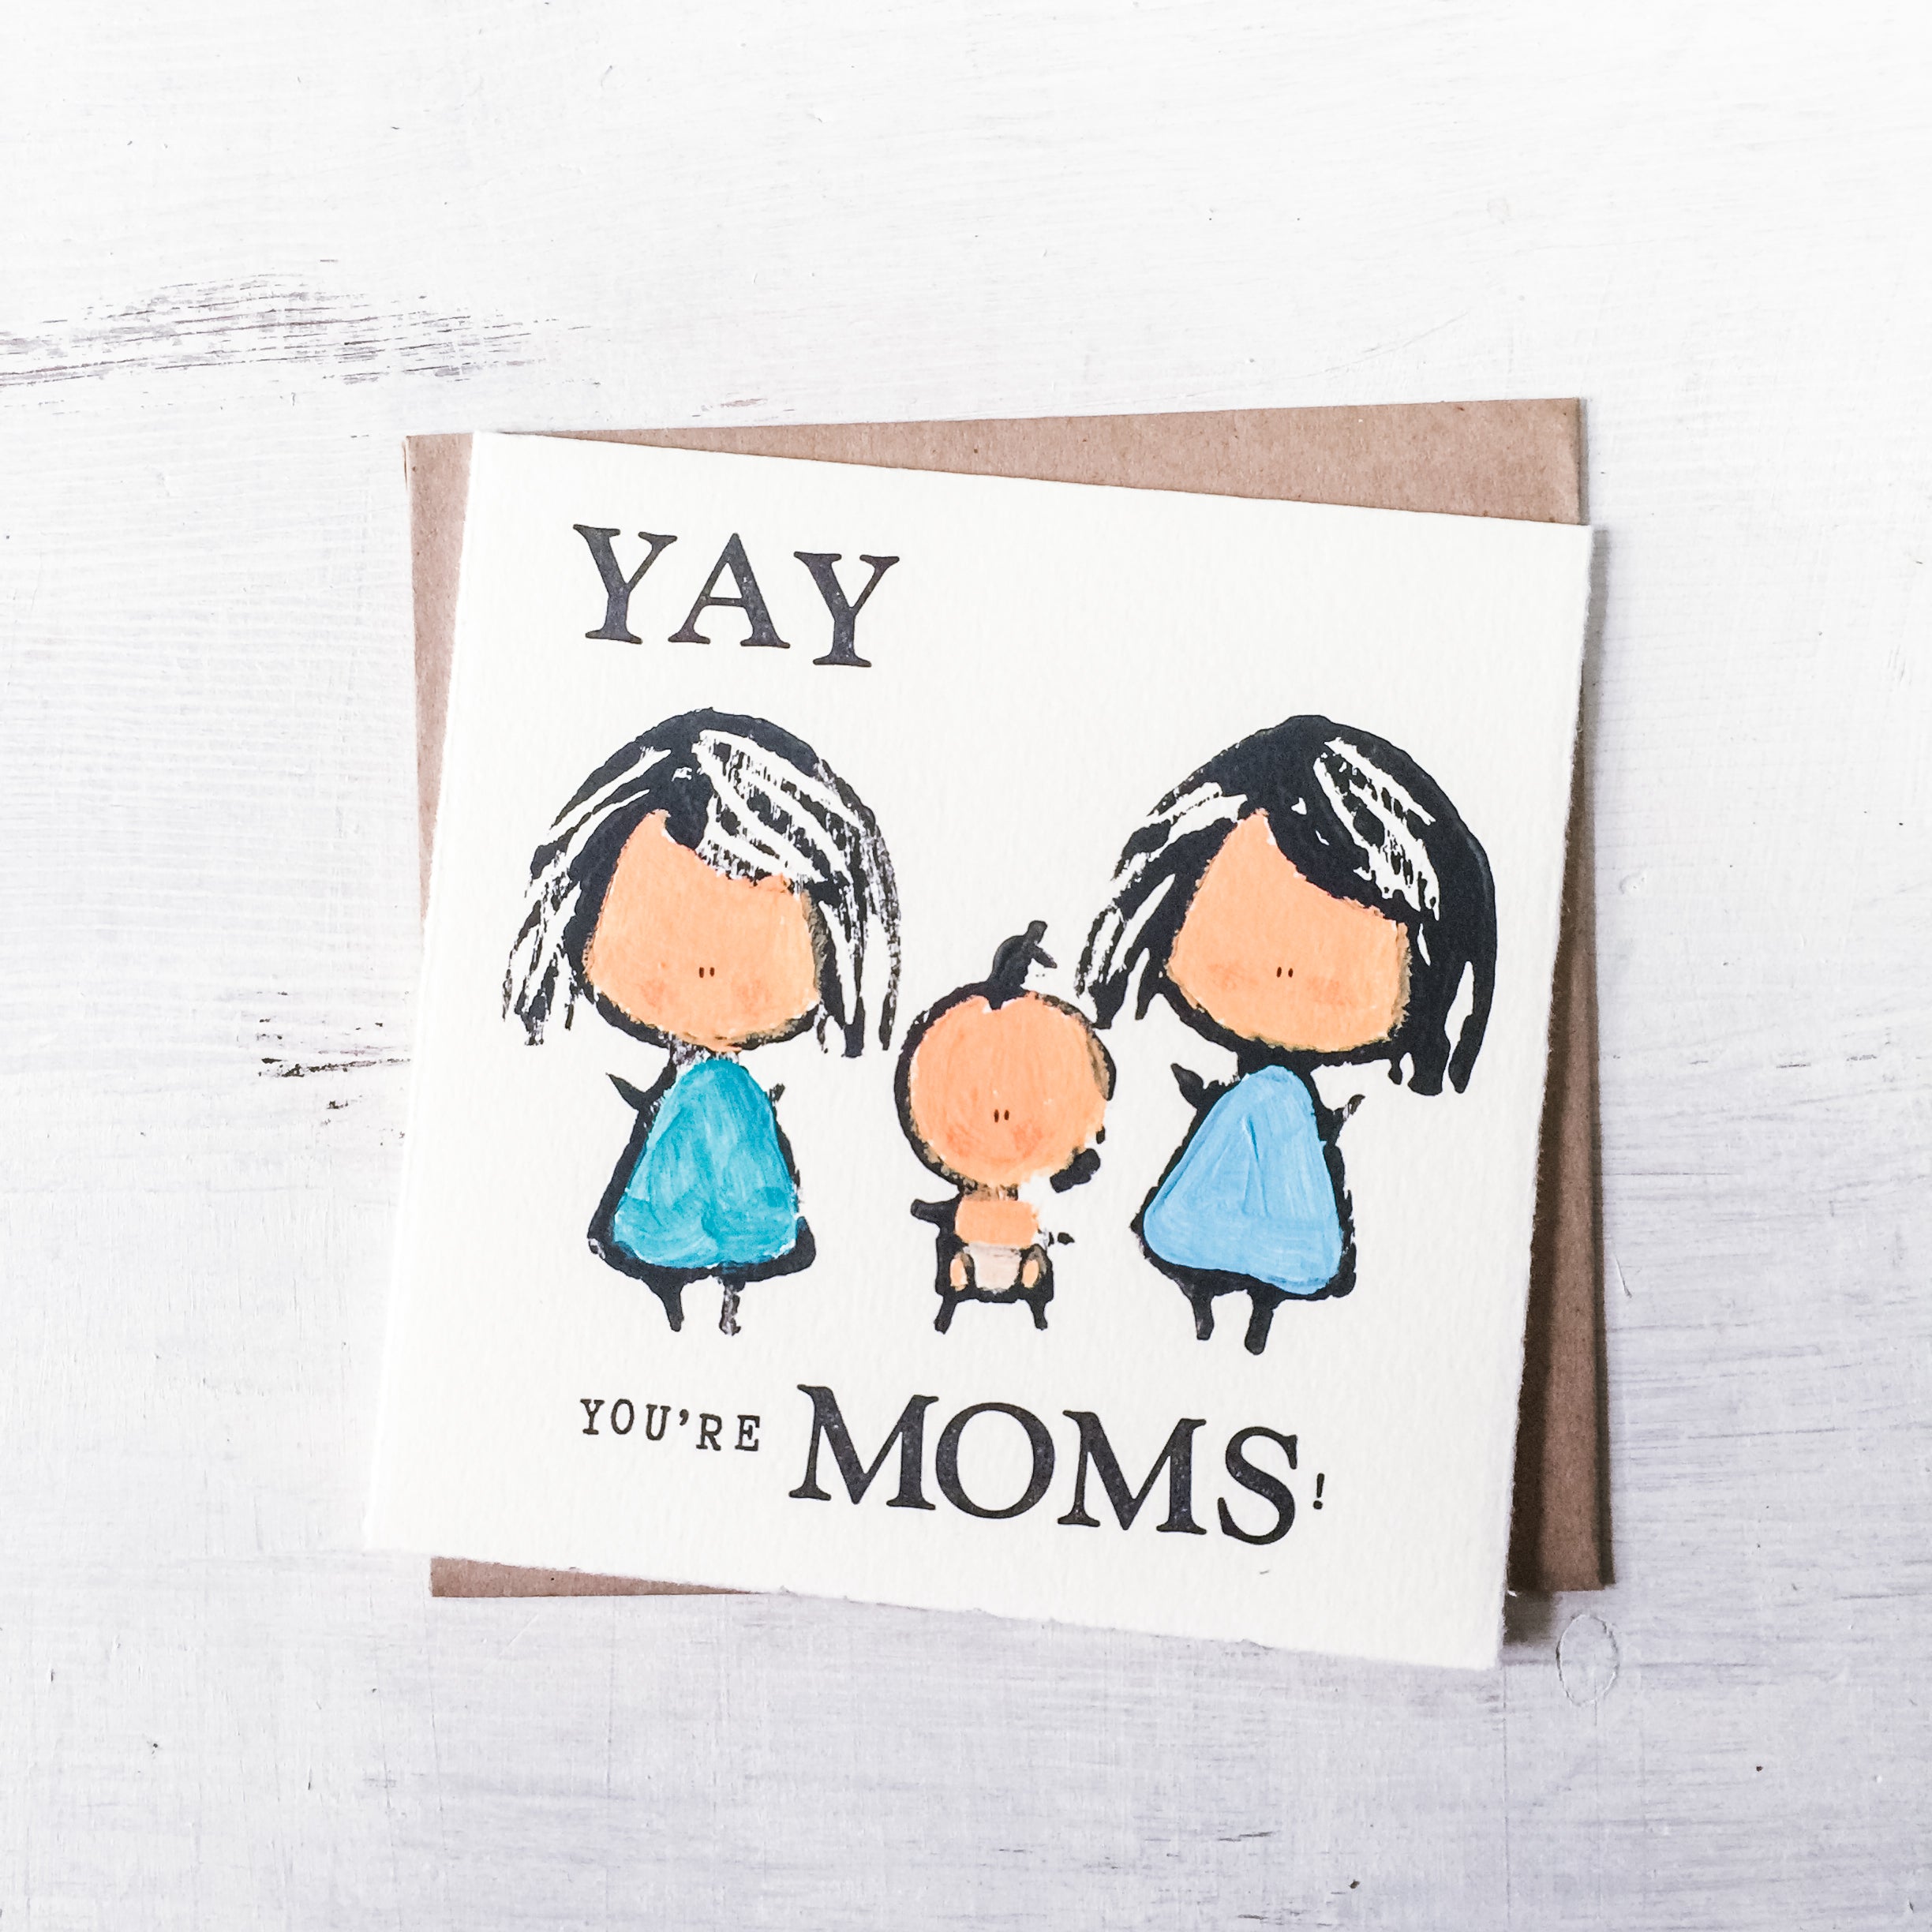 Yay You Are Moms / Dads! - Letterpress Greeting Card Uni-T